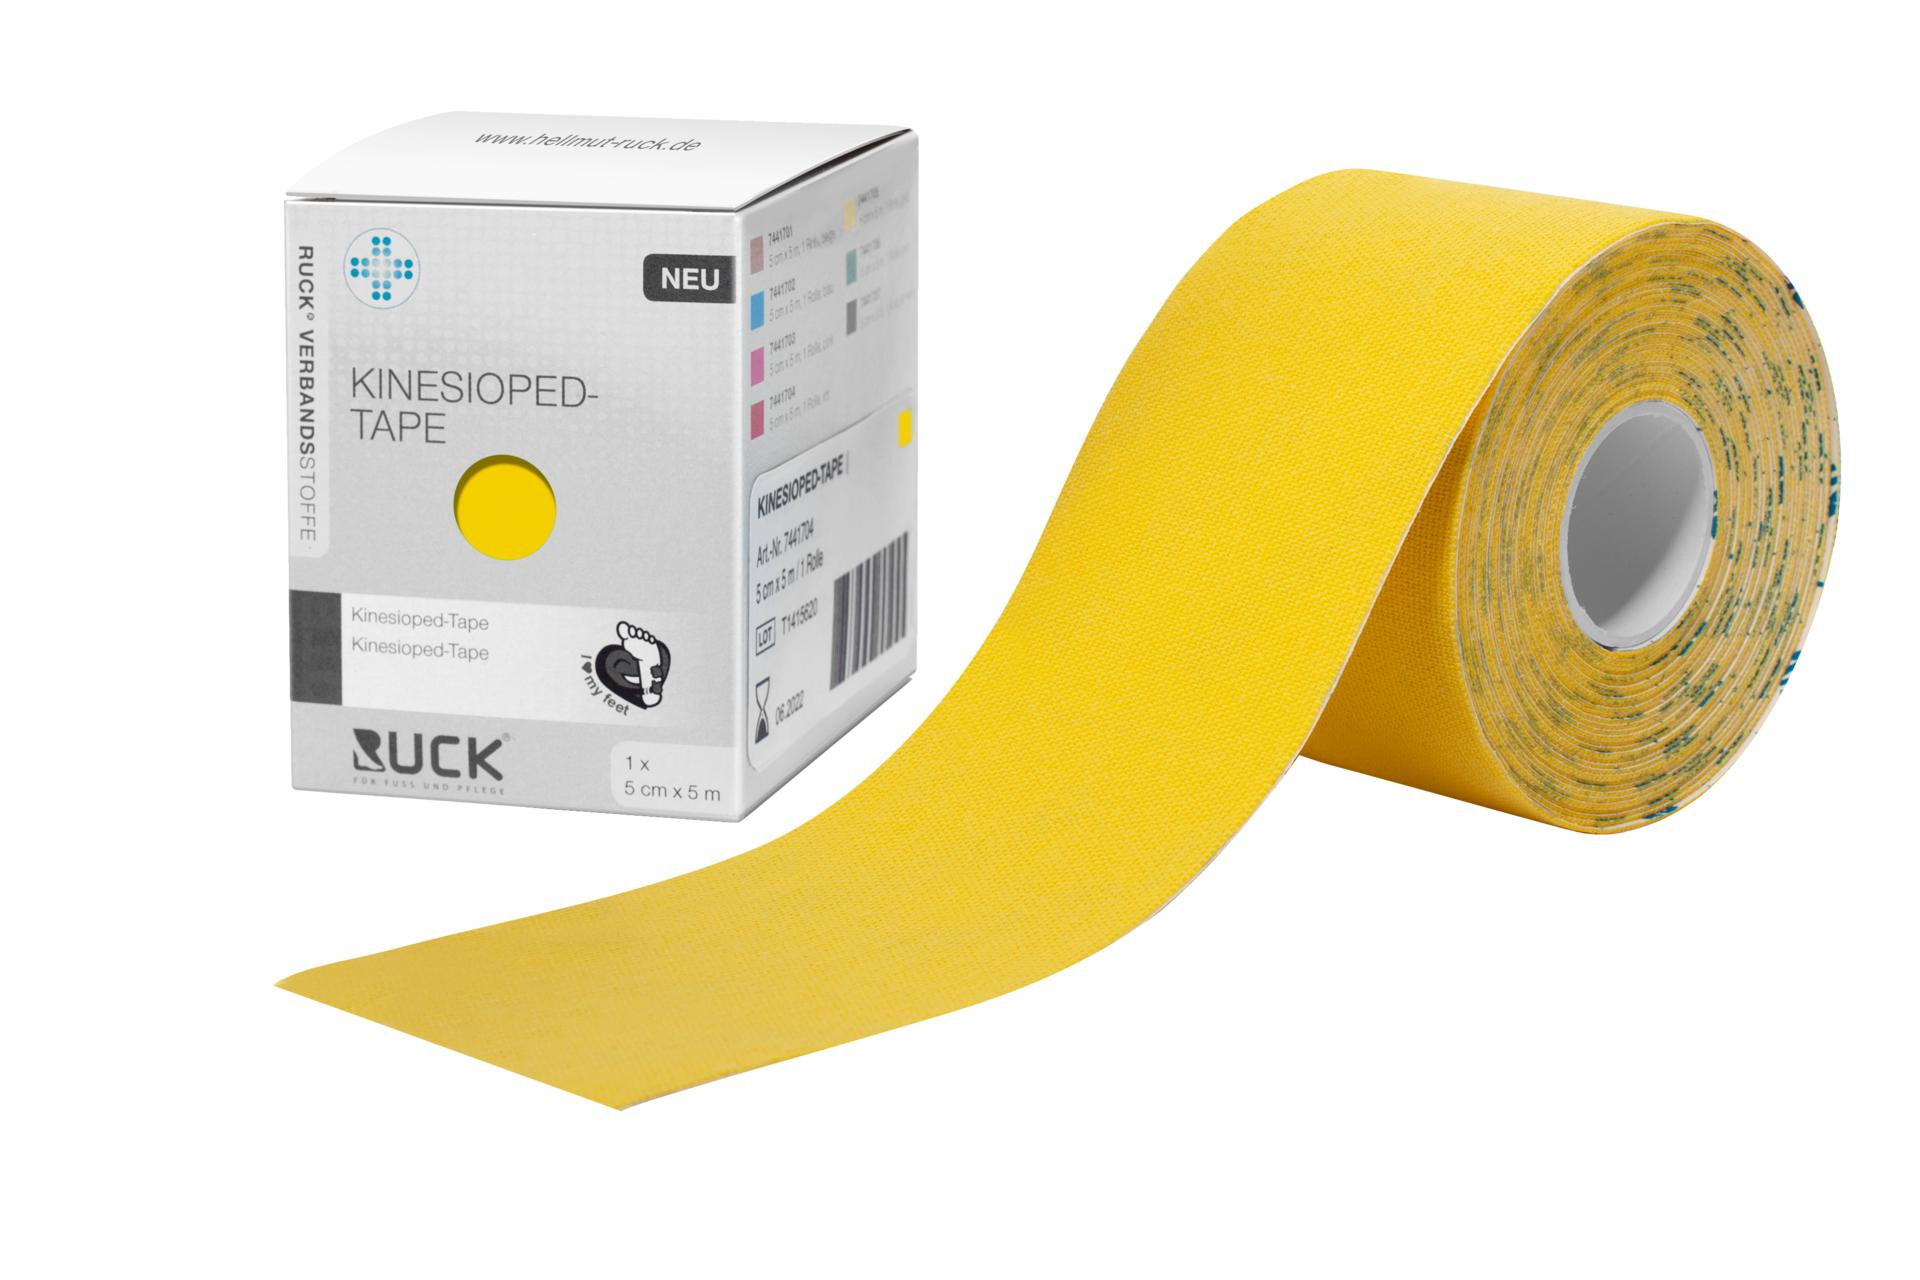 KINESIOPED-Tape 5 cm x 5 m, 1 Rolle gelb